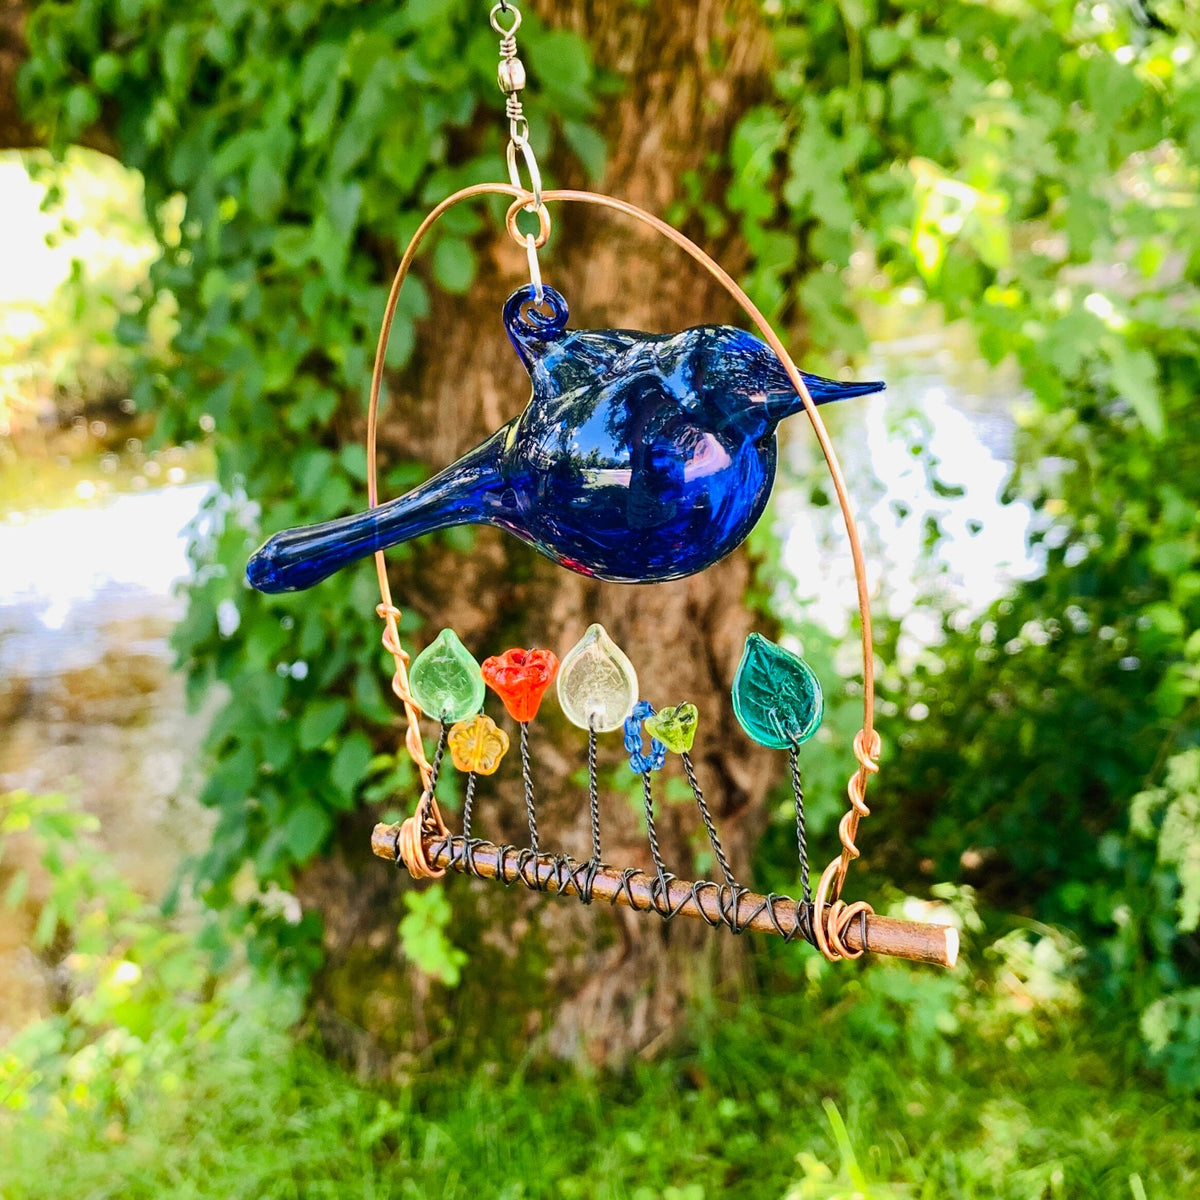 Hand Blown Glass Bird Wired Flower Garden Swing 2, Blue Decor Whimsical Wire and Glass 